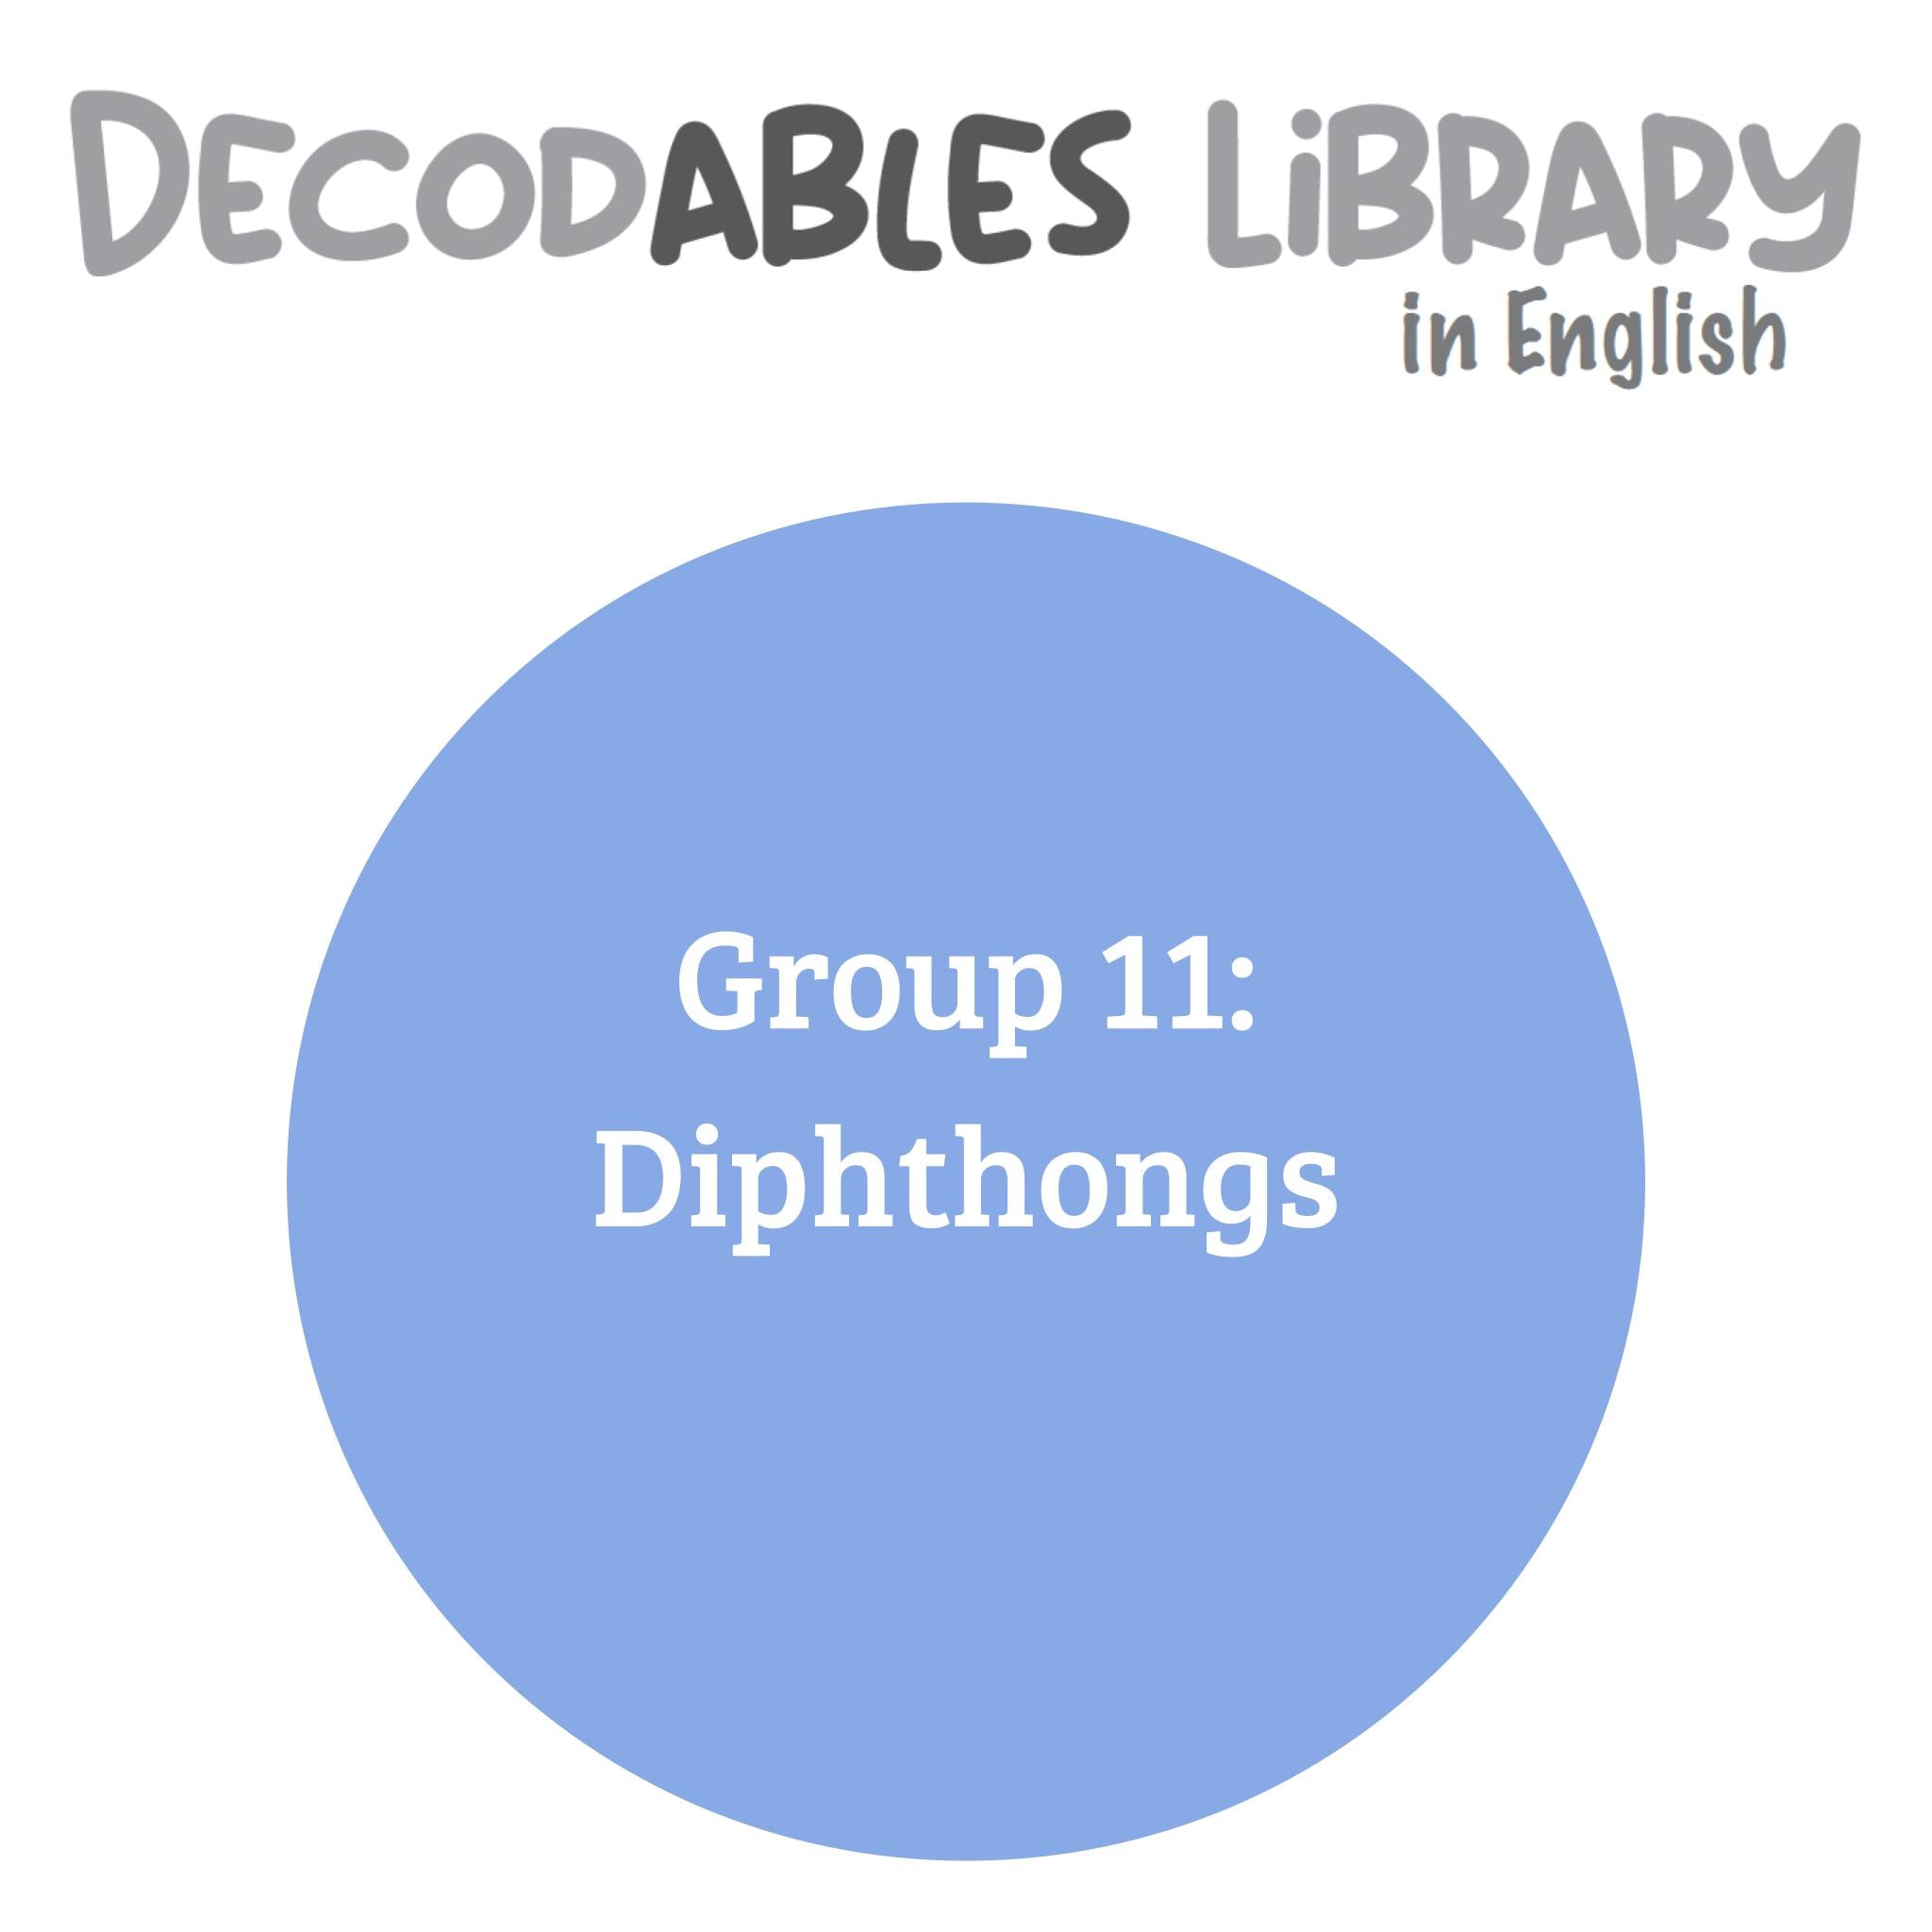 English Decodables Library - Group 11: Diphthongs (set of 6 titles)